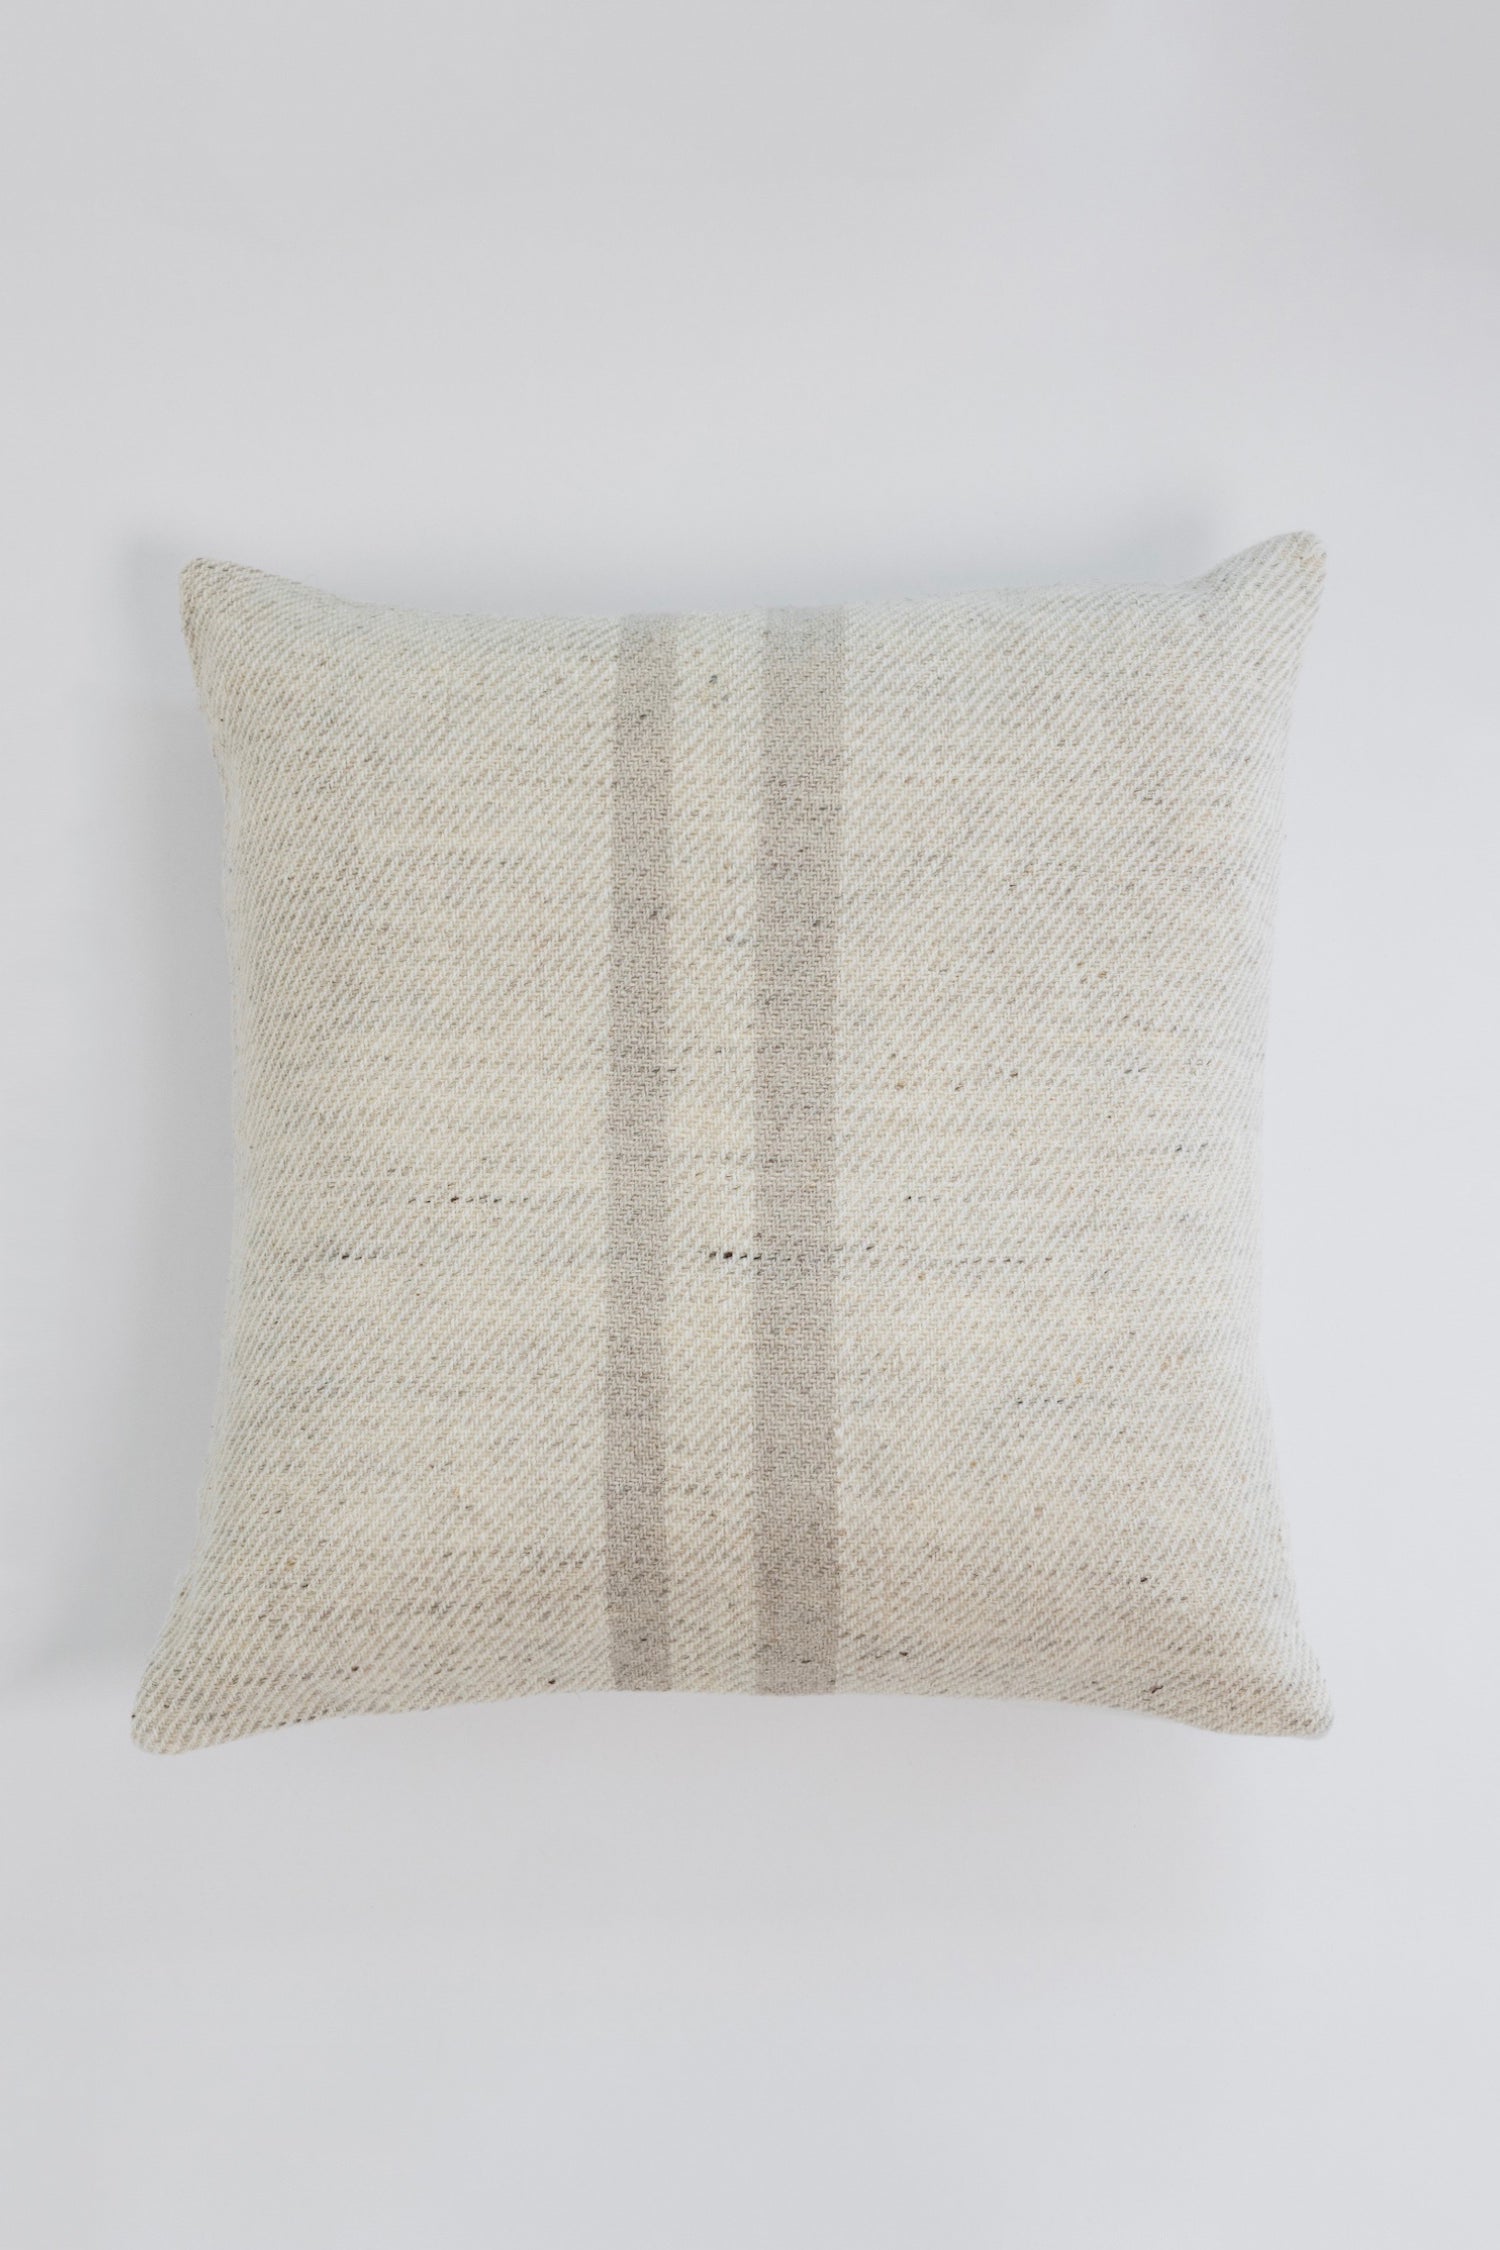 Dulce Striped Pillow - Ivory